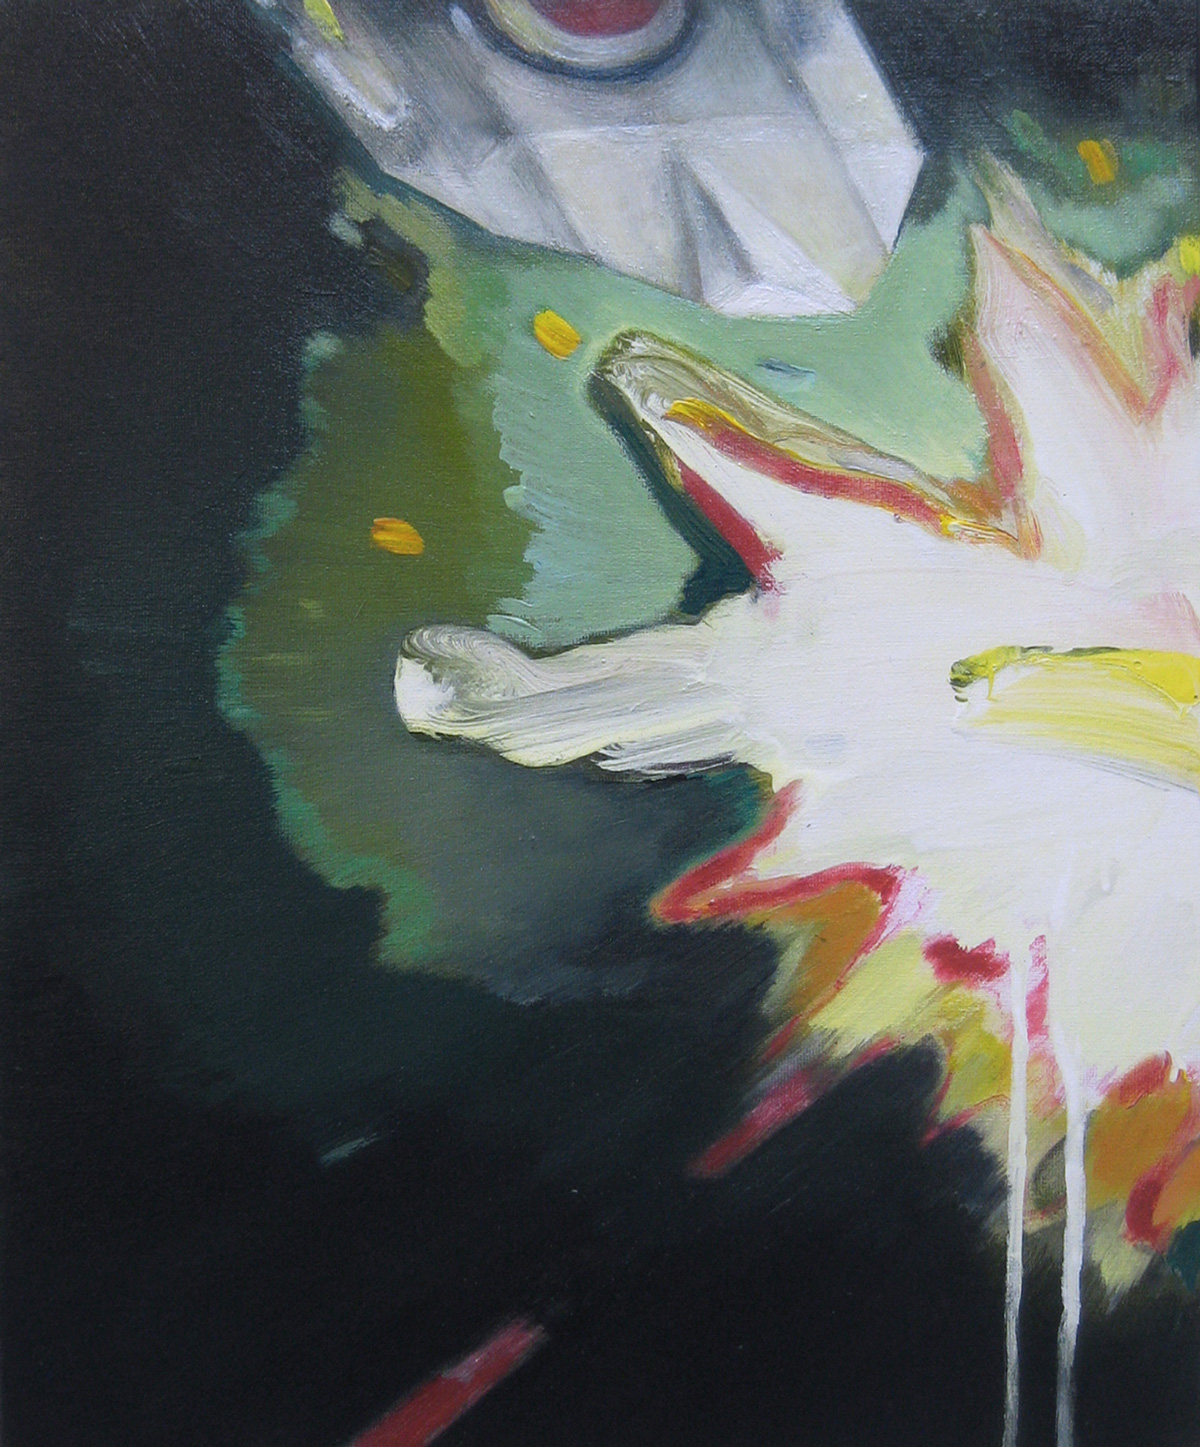 painting acrylic canvas origami paper airplane green explosion expressive drama airplane marck fink